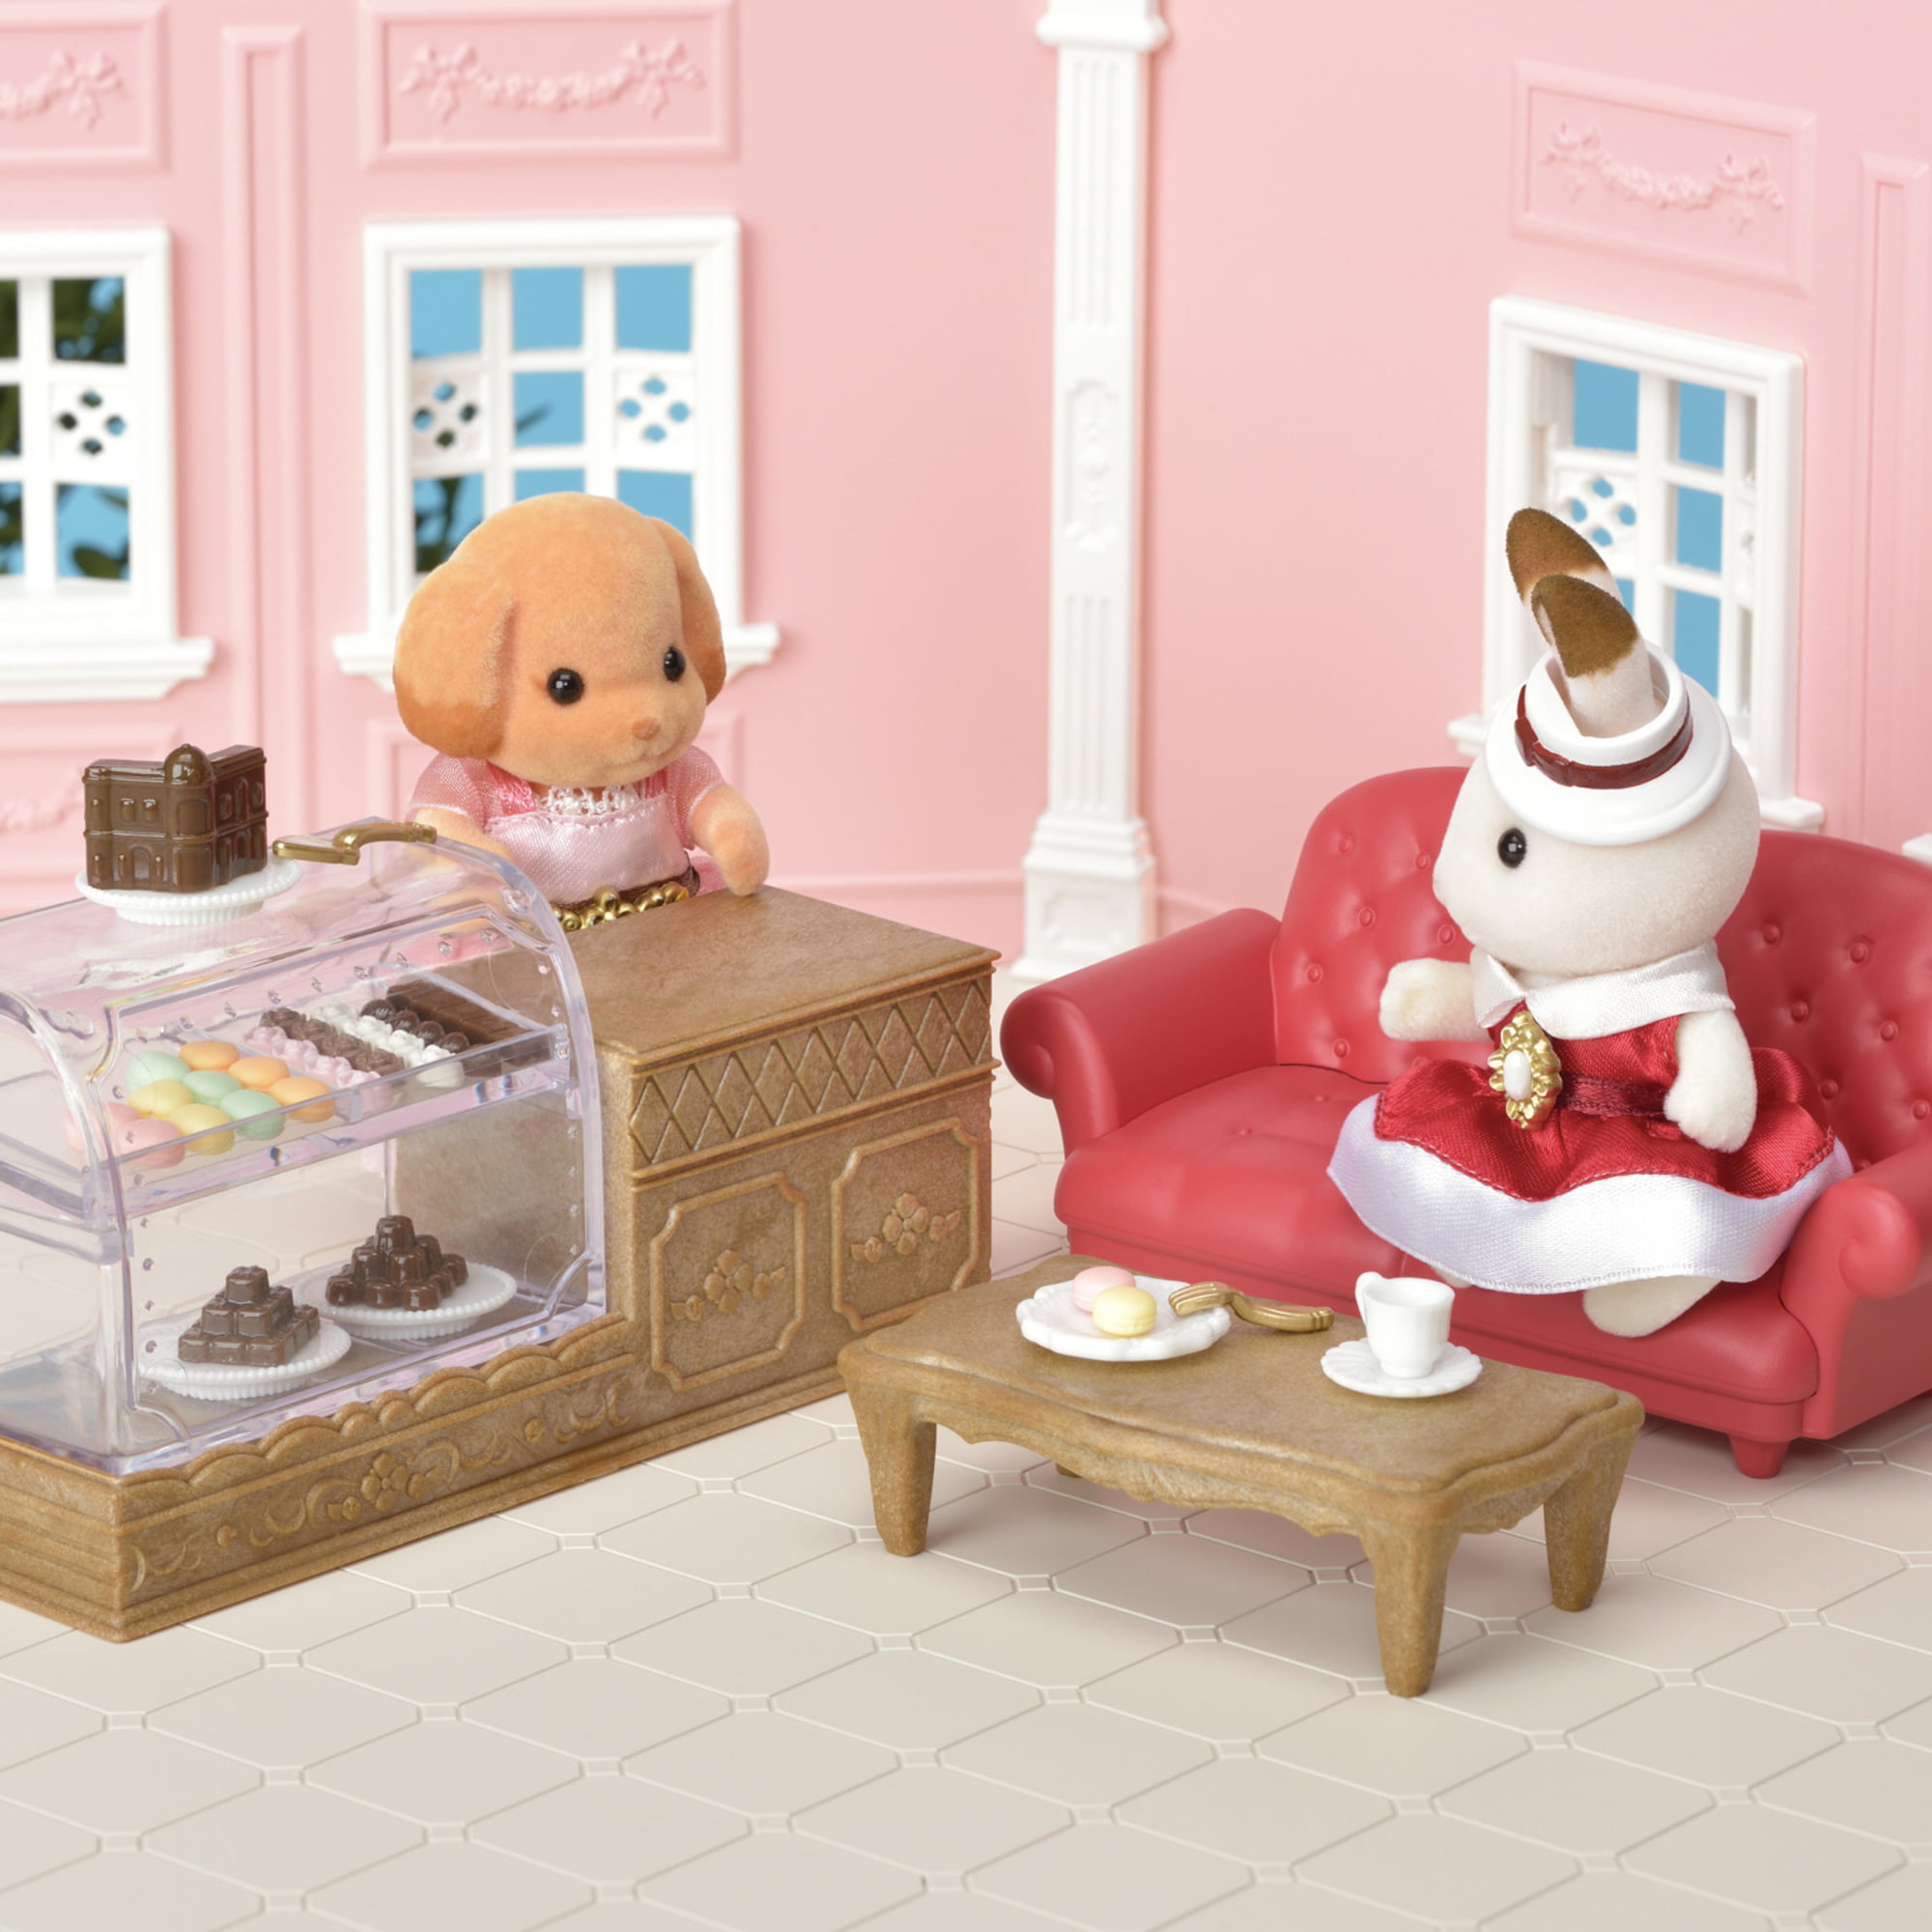 Calico Critters - Chocolate Lounge